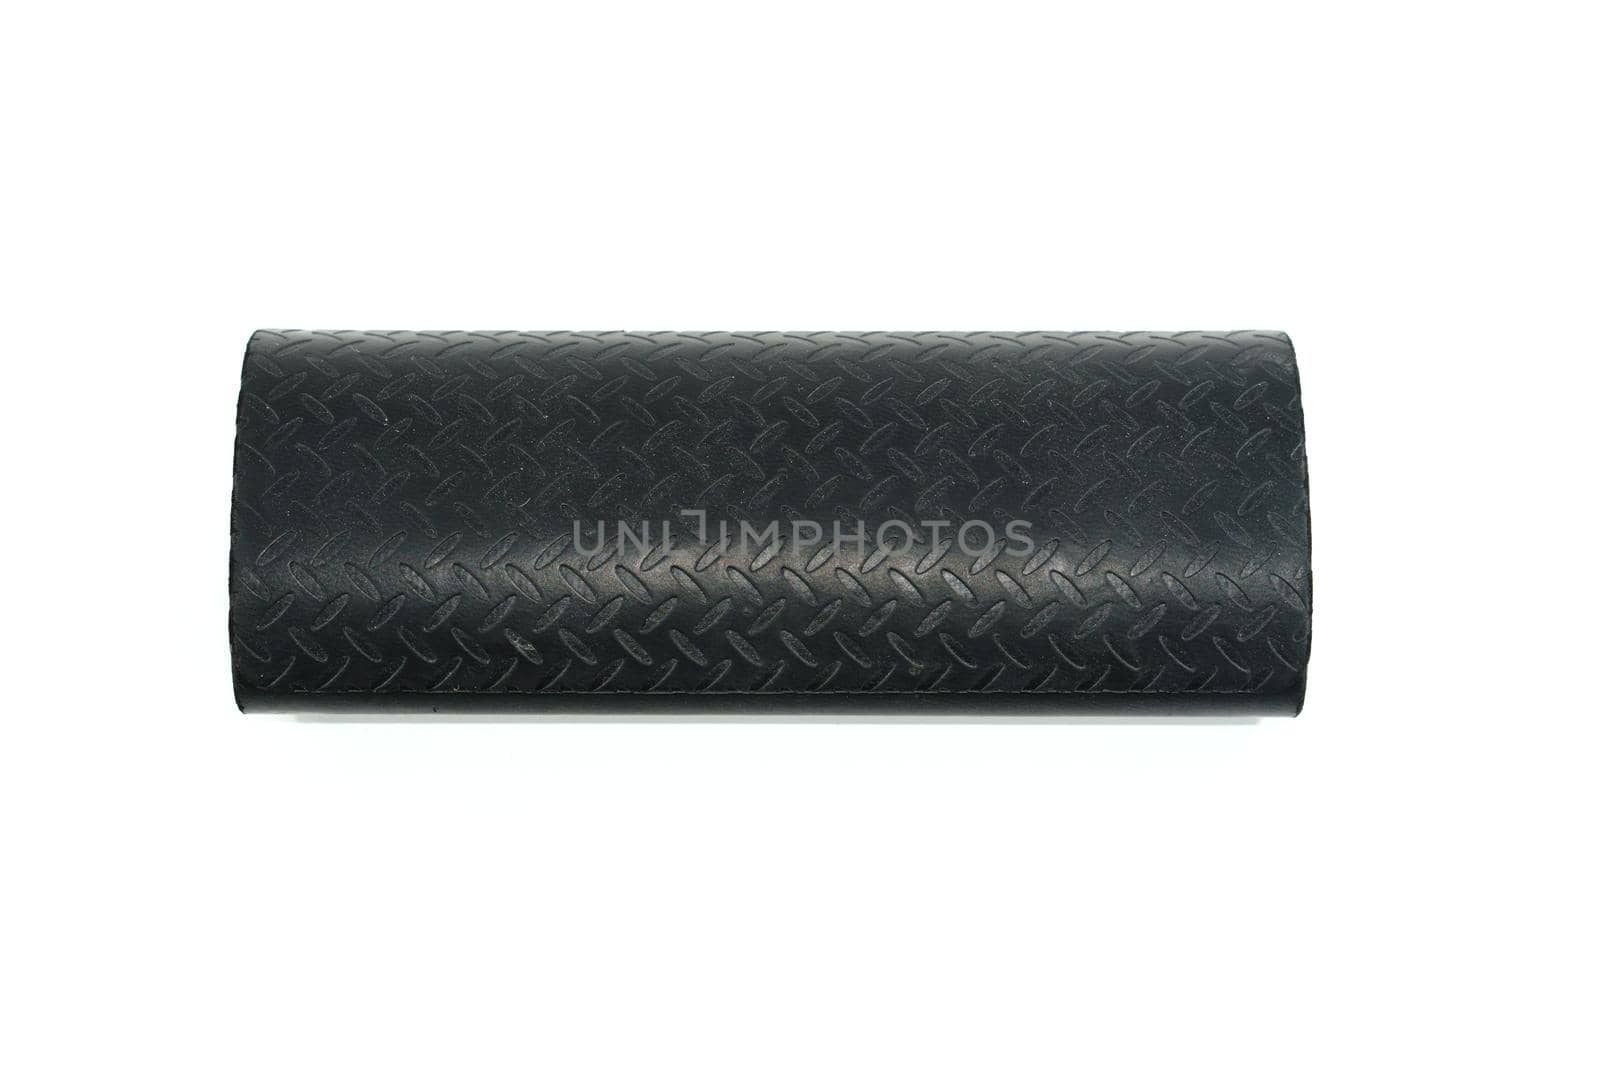 glasses case in black color isolated on white background